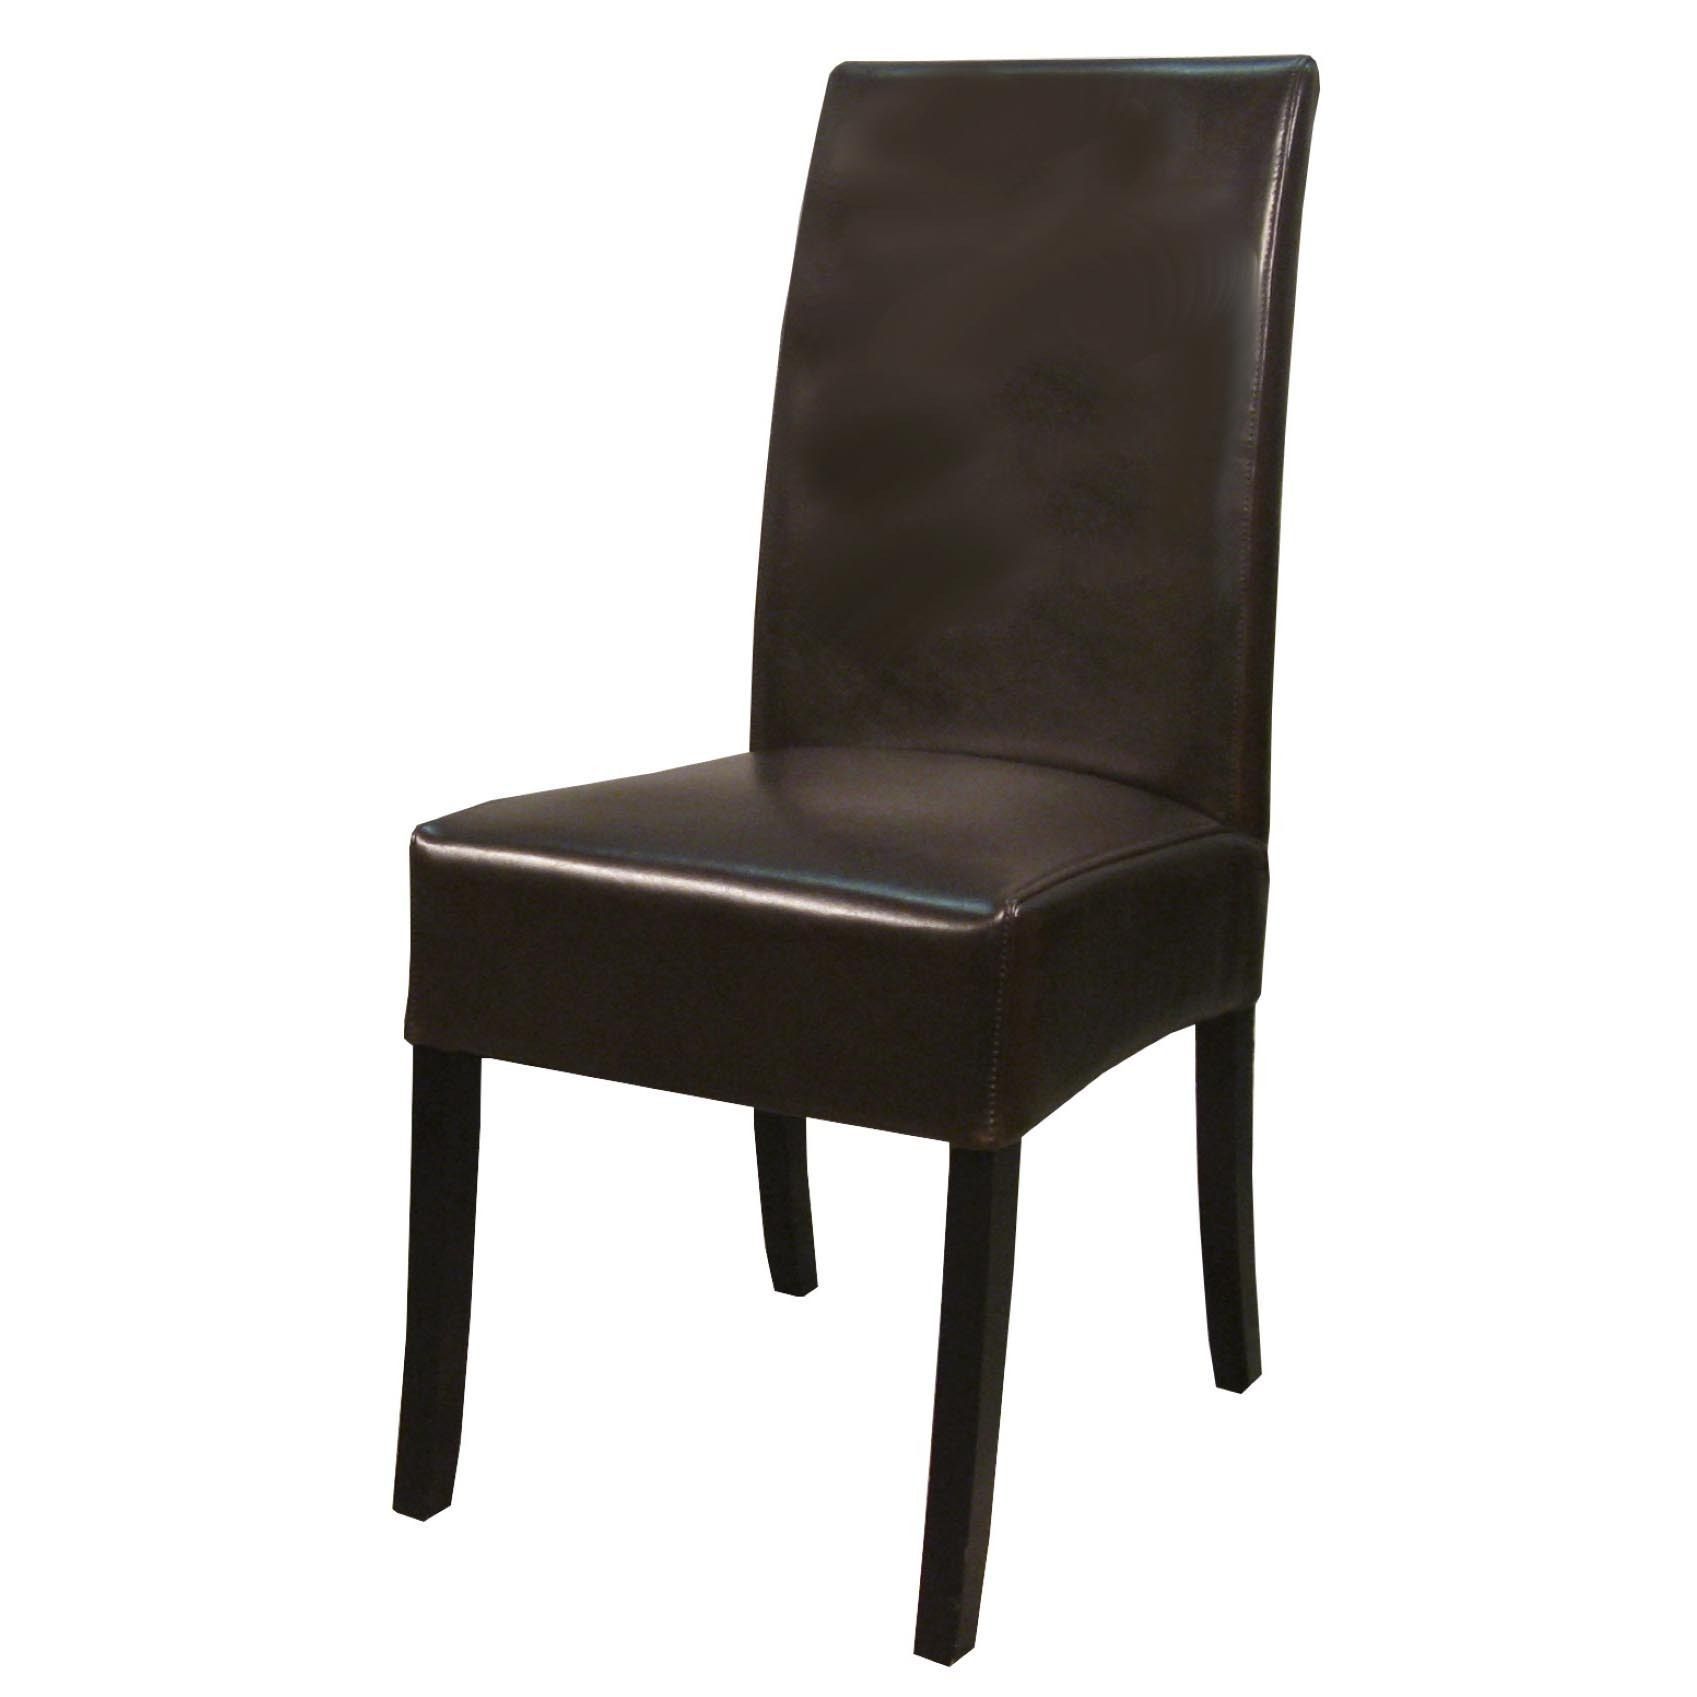 Widely Used Valencia Bonded Leather Chair (set Of 2) (black) (View 11 of 20)